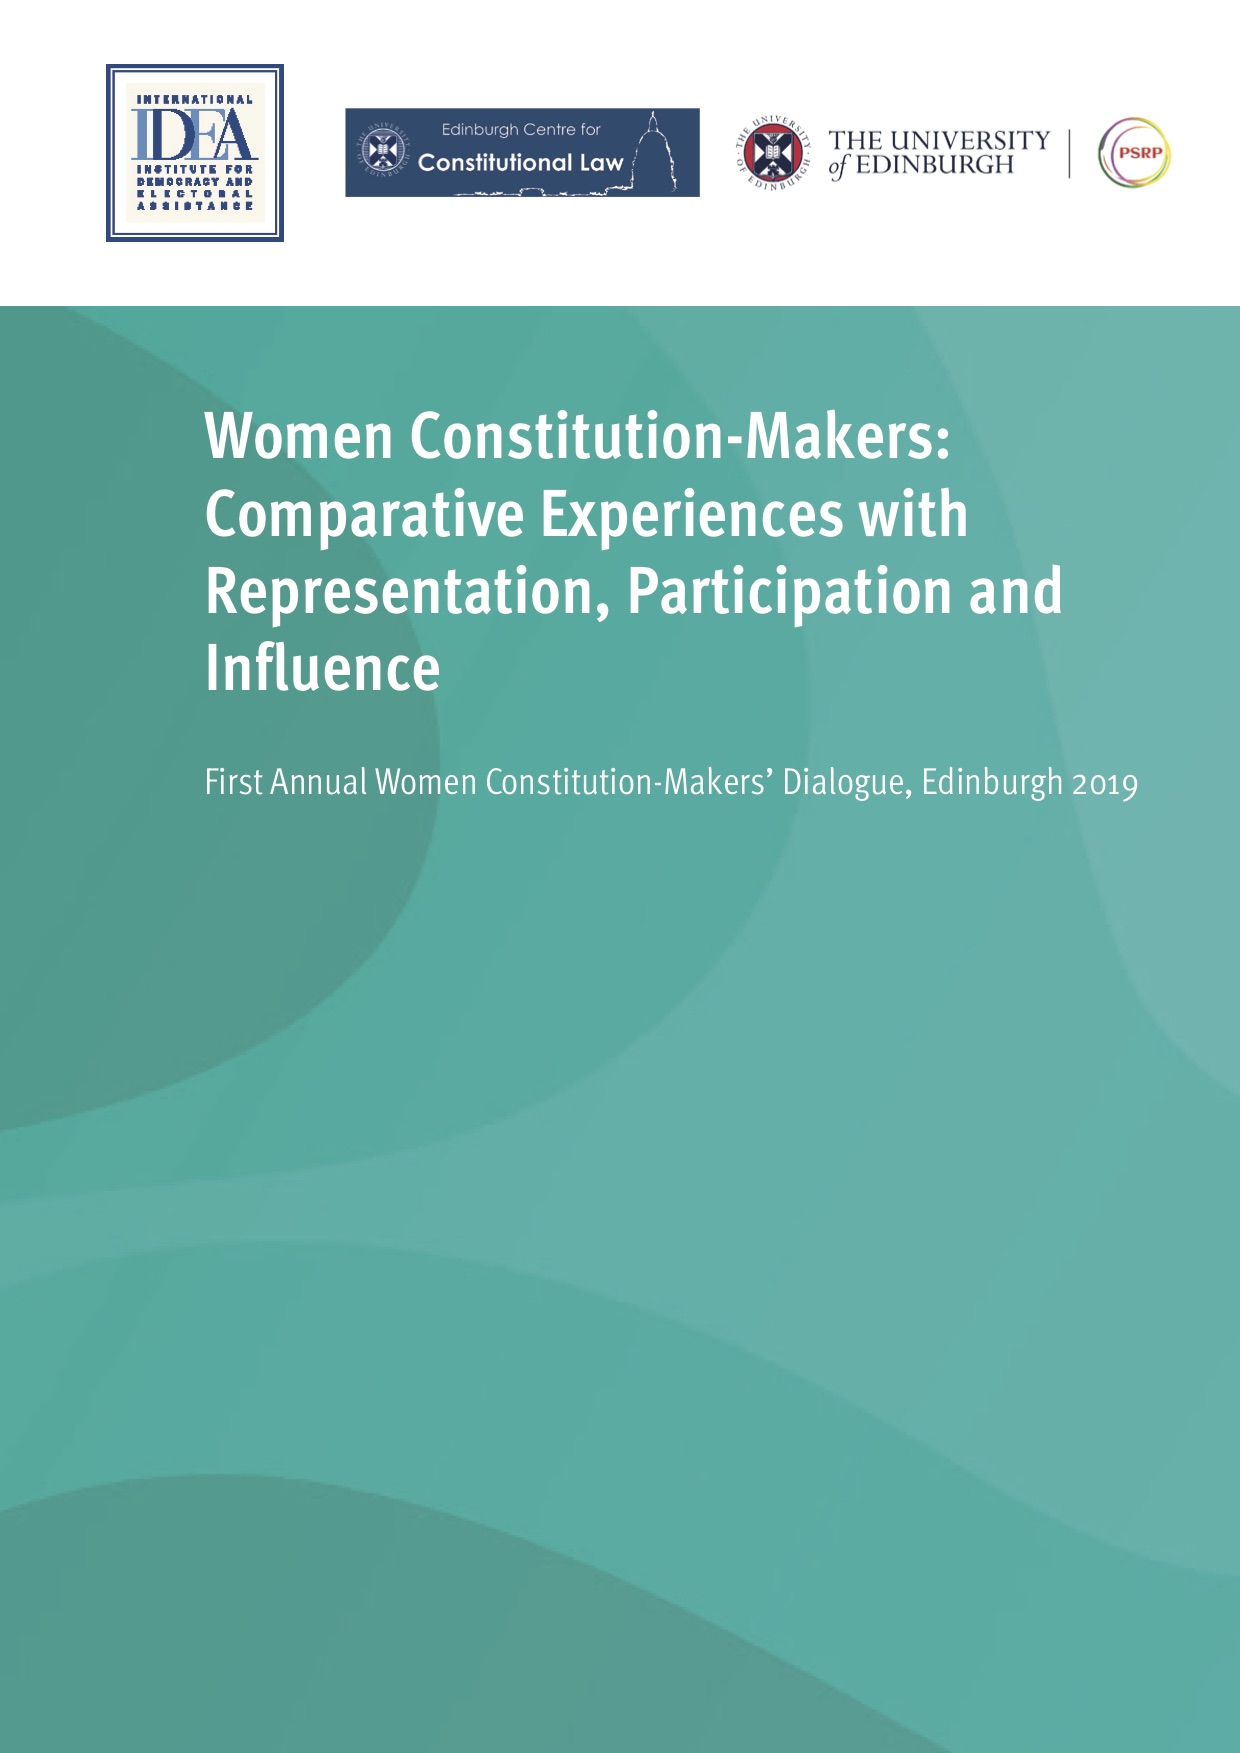 Women Constitution-Makers: Comparative Experiences with Representation, Participation and Influence